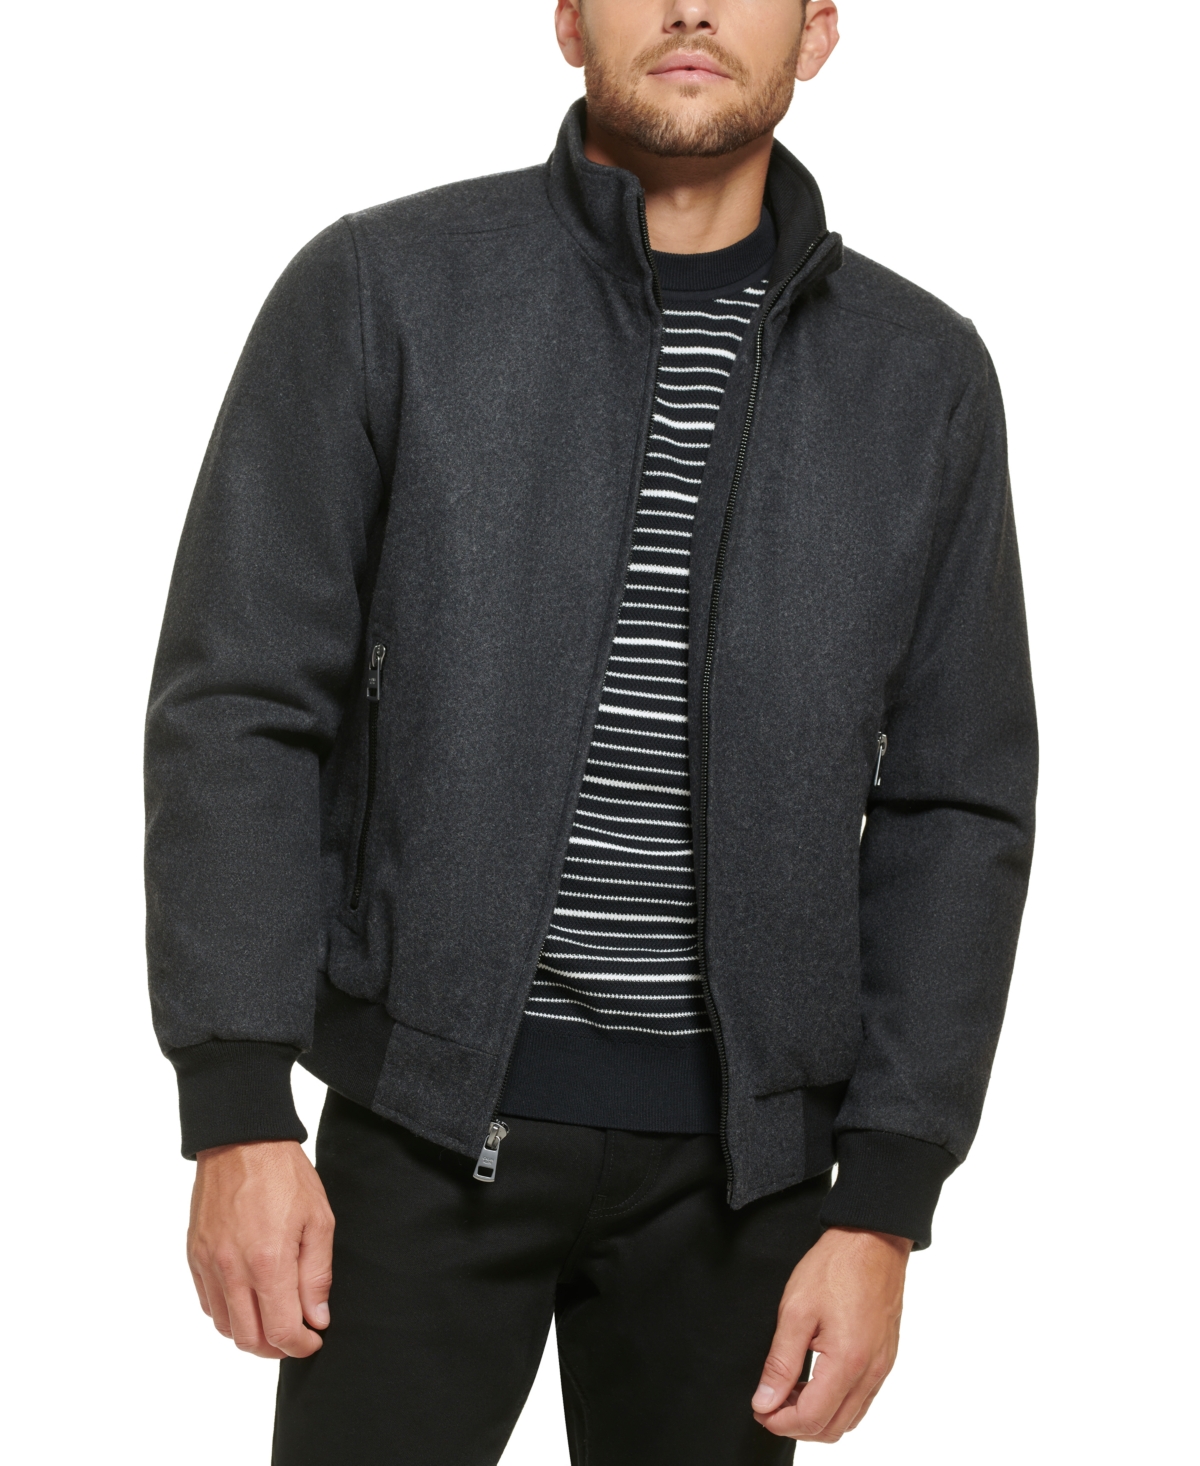 Men's Wool Bomber Jacket With Knit Trim - Charcoal